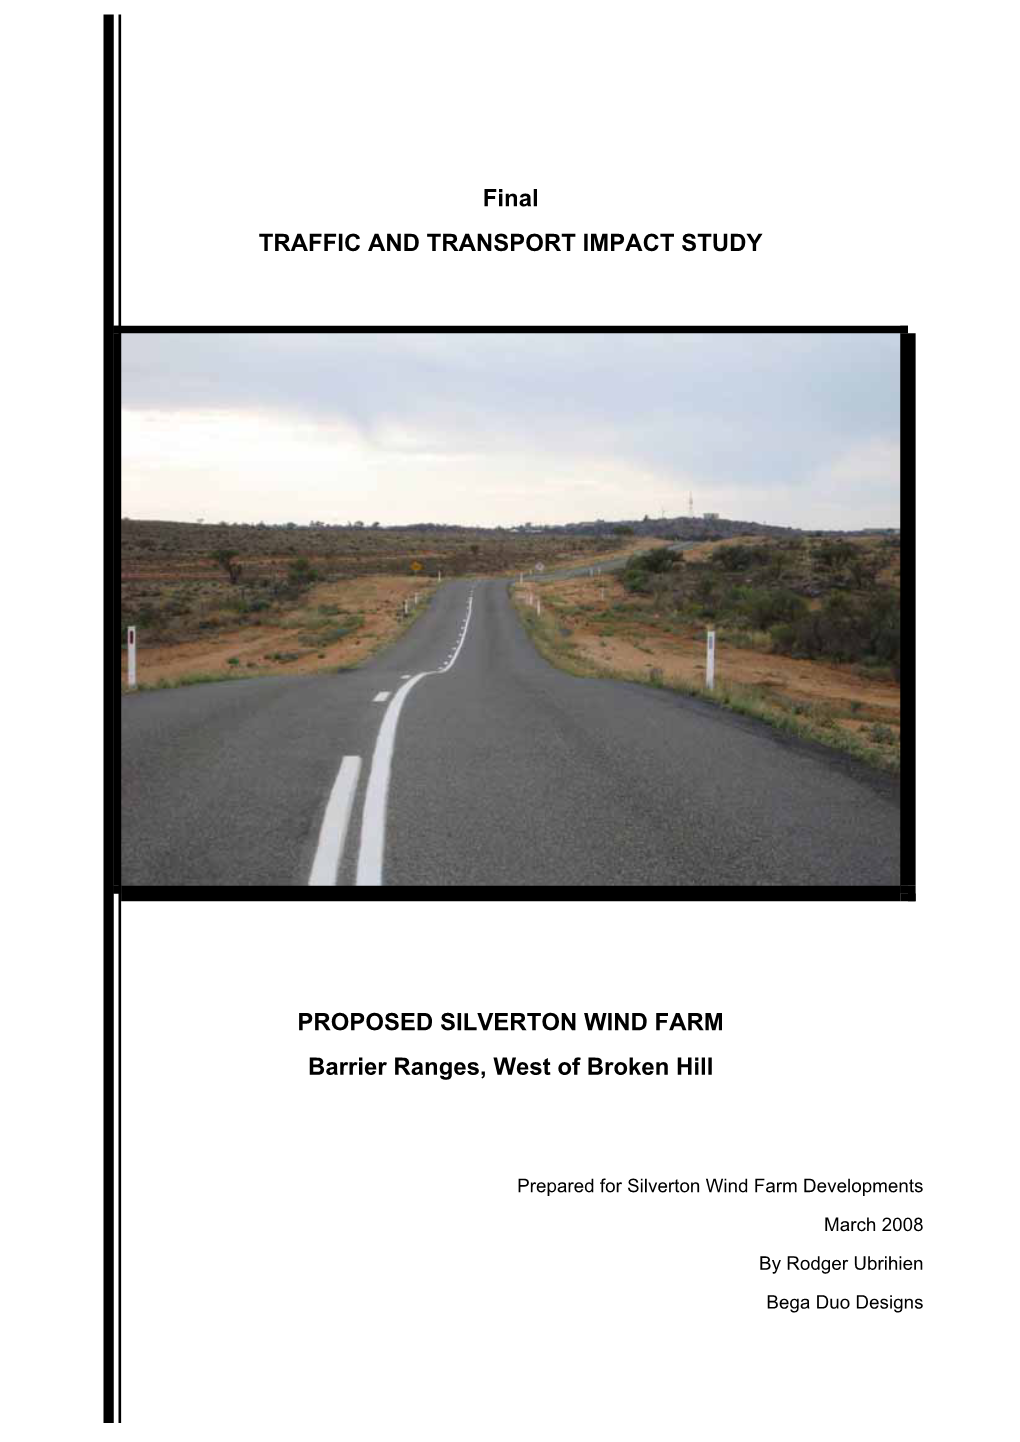 Final TRAFFIC and TRANSPORT IMPACT STUDY PROPOSED